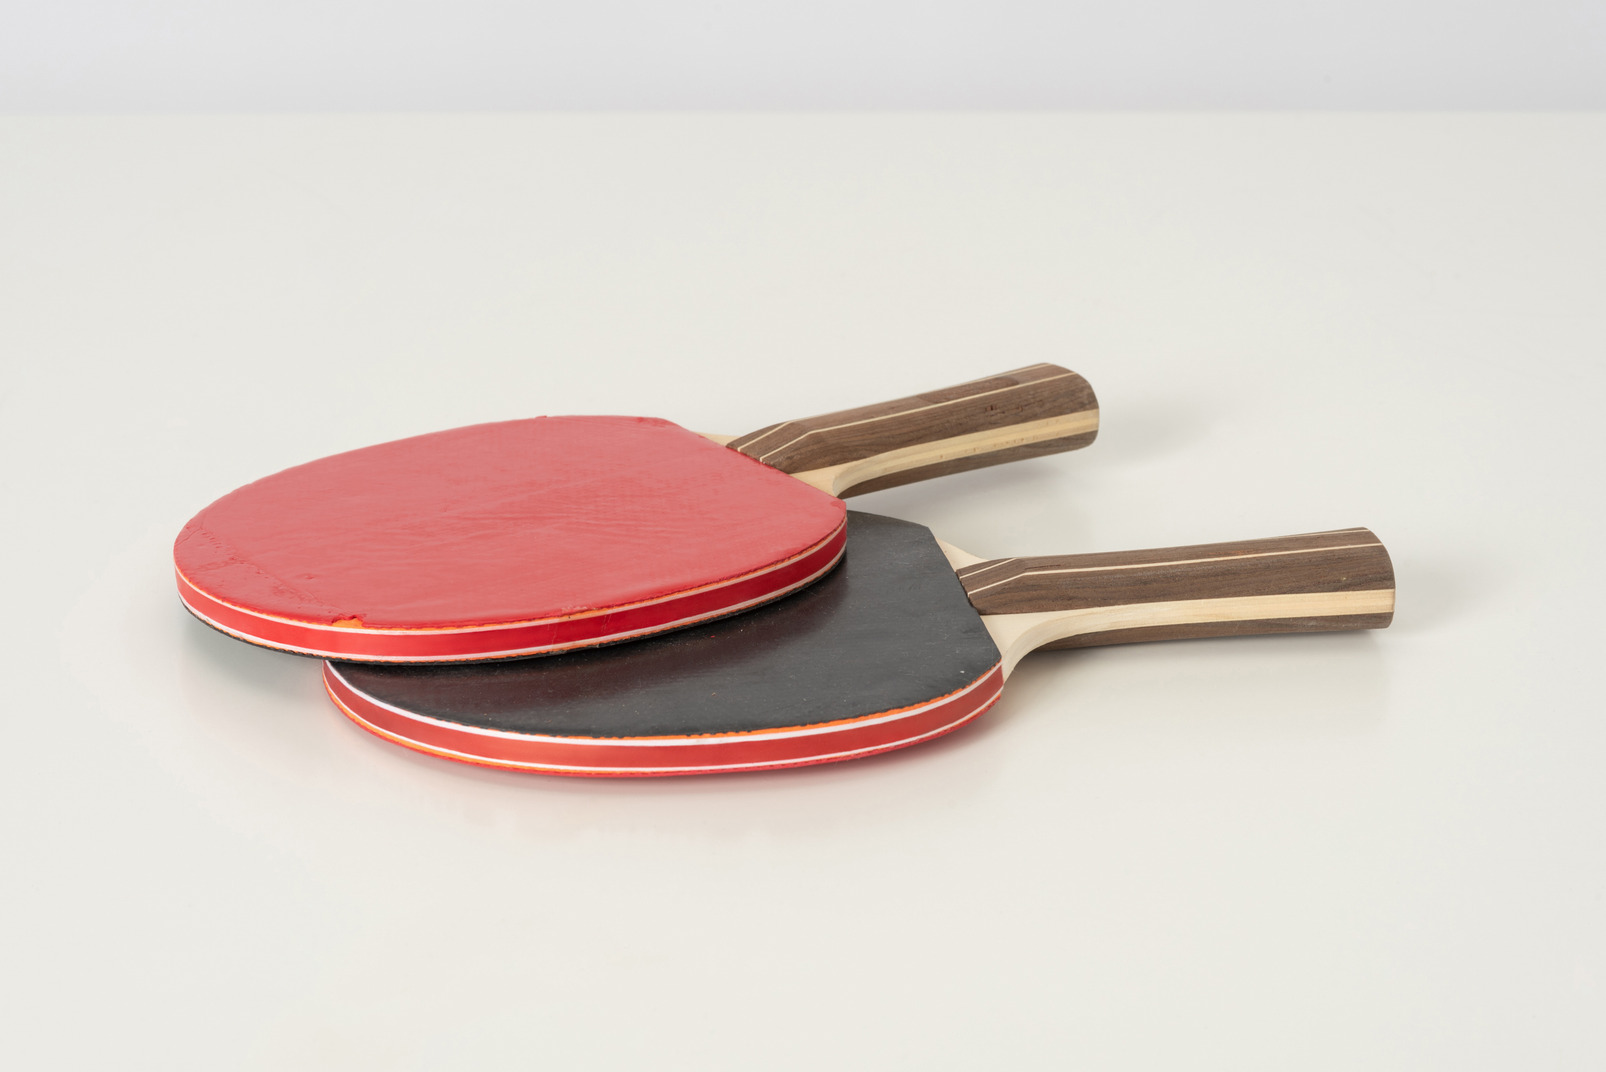 Red tennis rackets on a white background